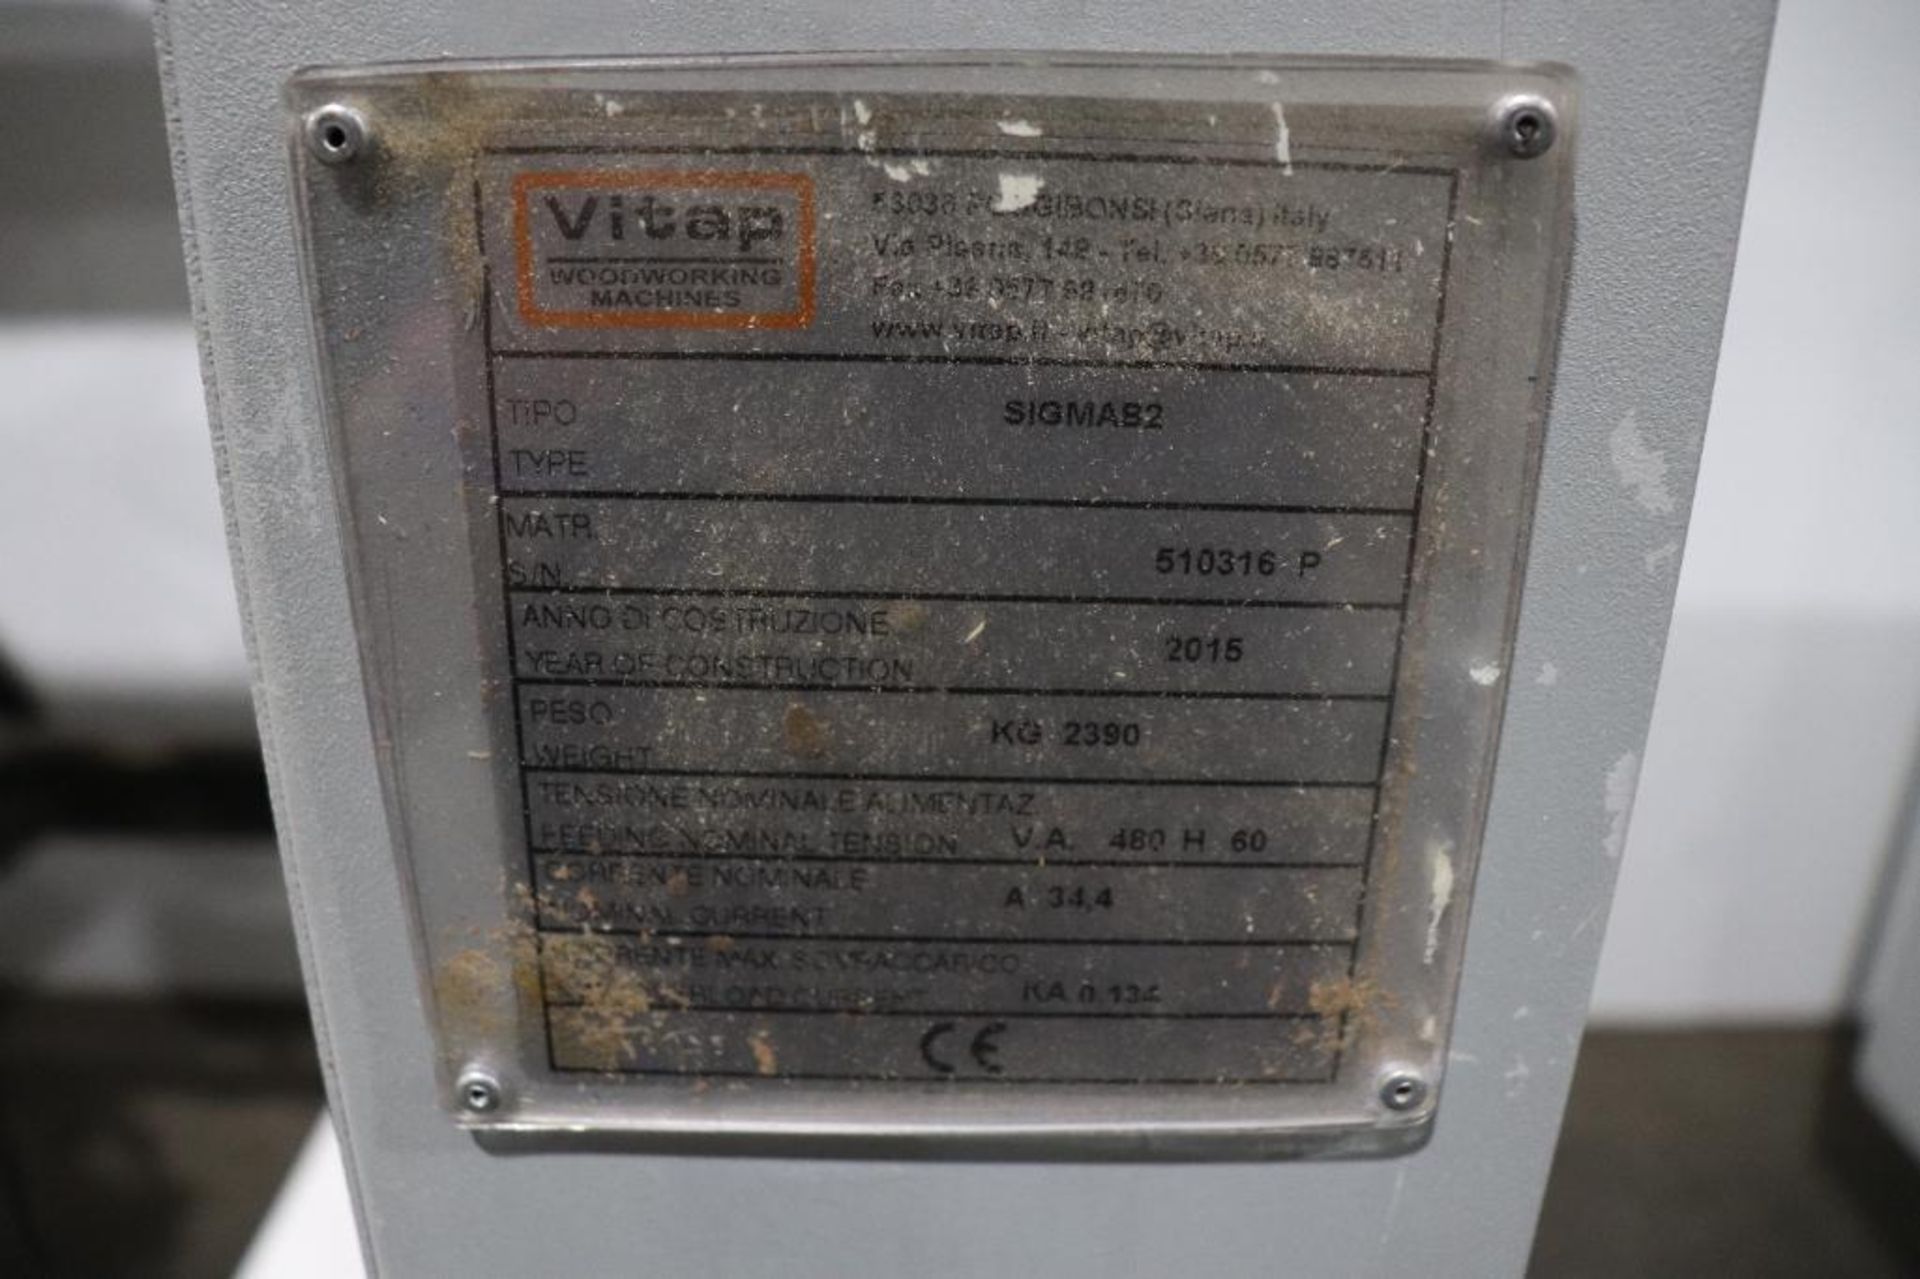 Vitap Sigma B2 174 spindle feed though Boring Machine - Image 13 of 15